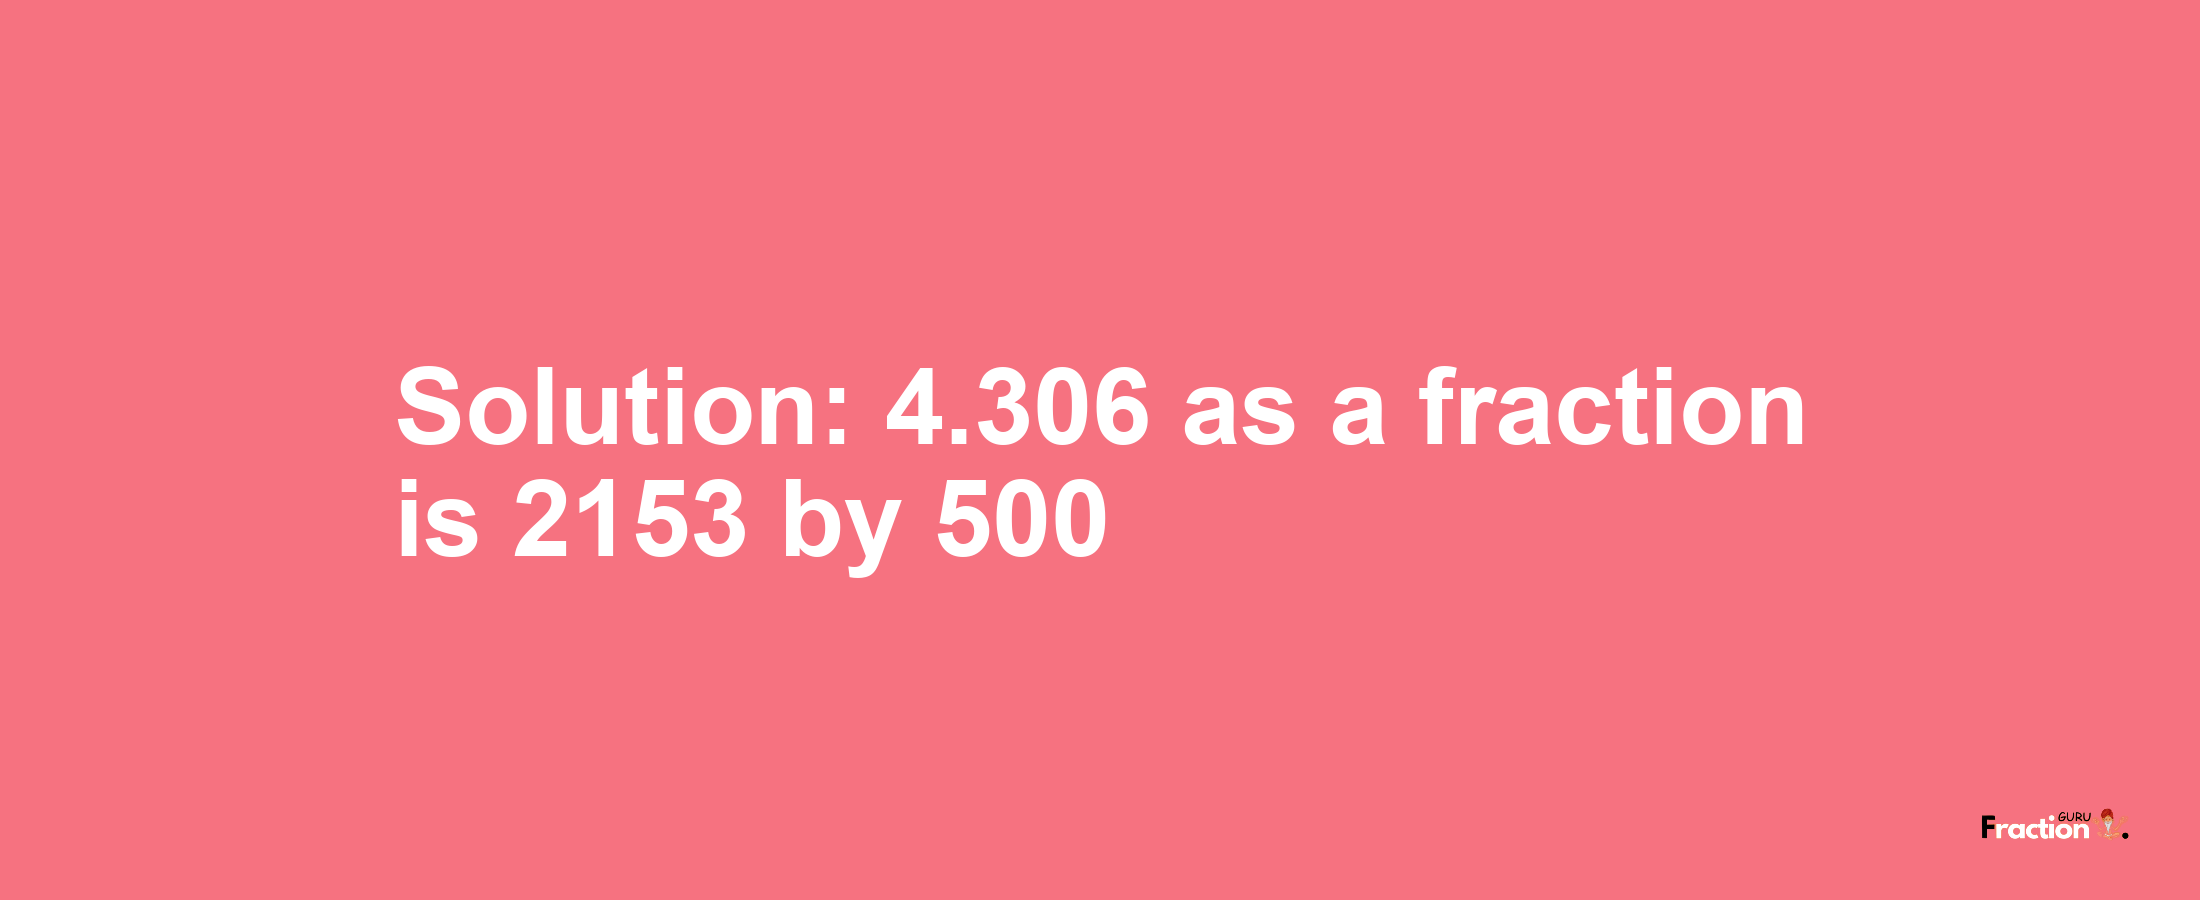 Solution:4.306 as a fraction is 2153/500